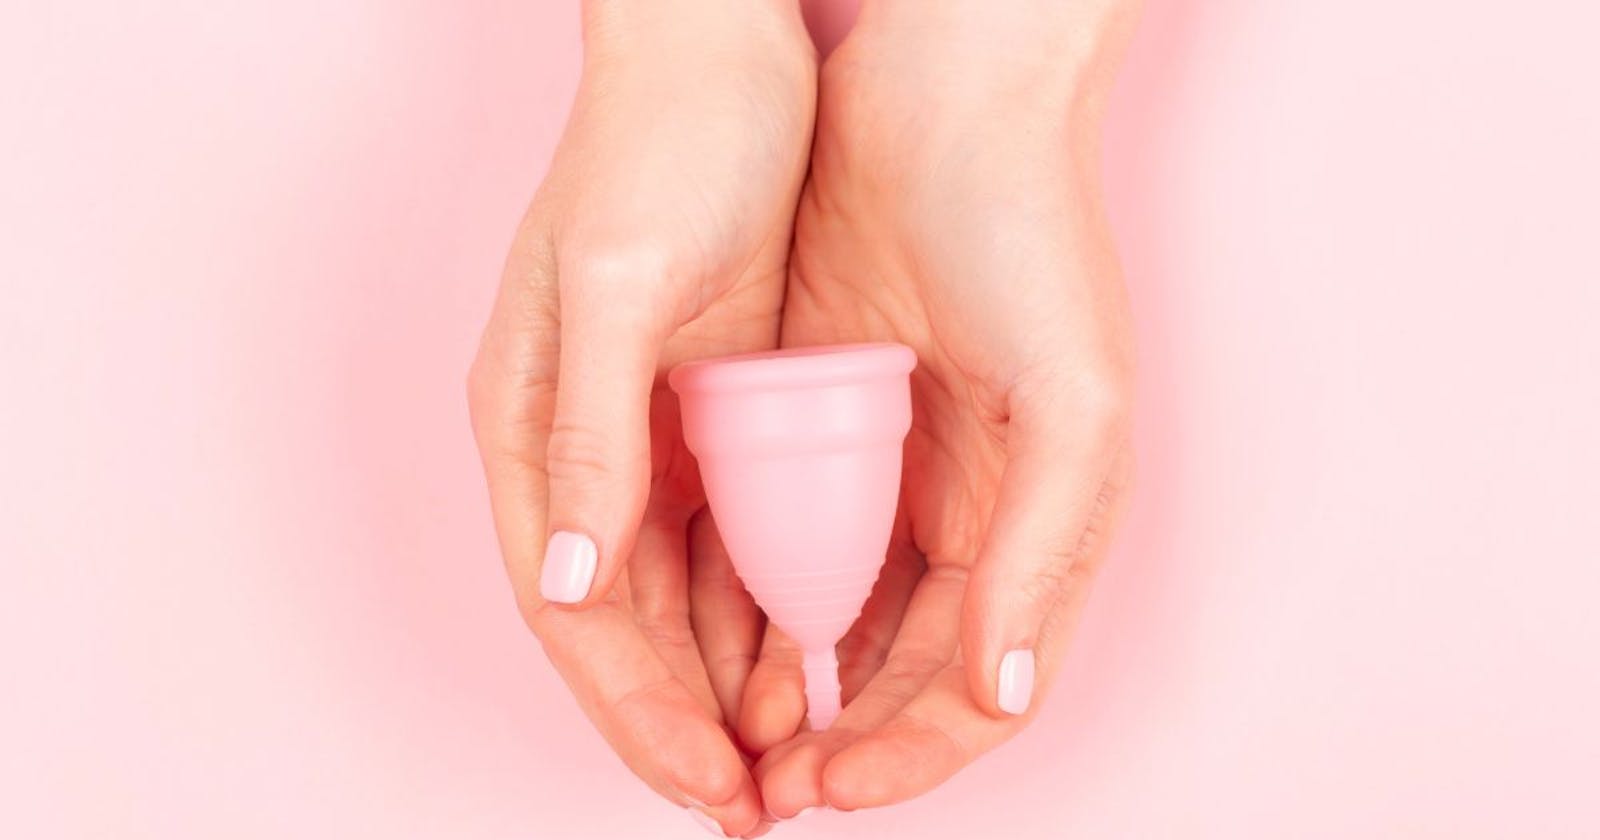 Cup Catastrophe! Does Your Period Cup Secretly Stink Up Your Life?